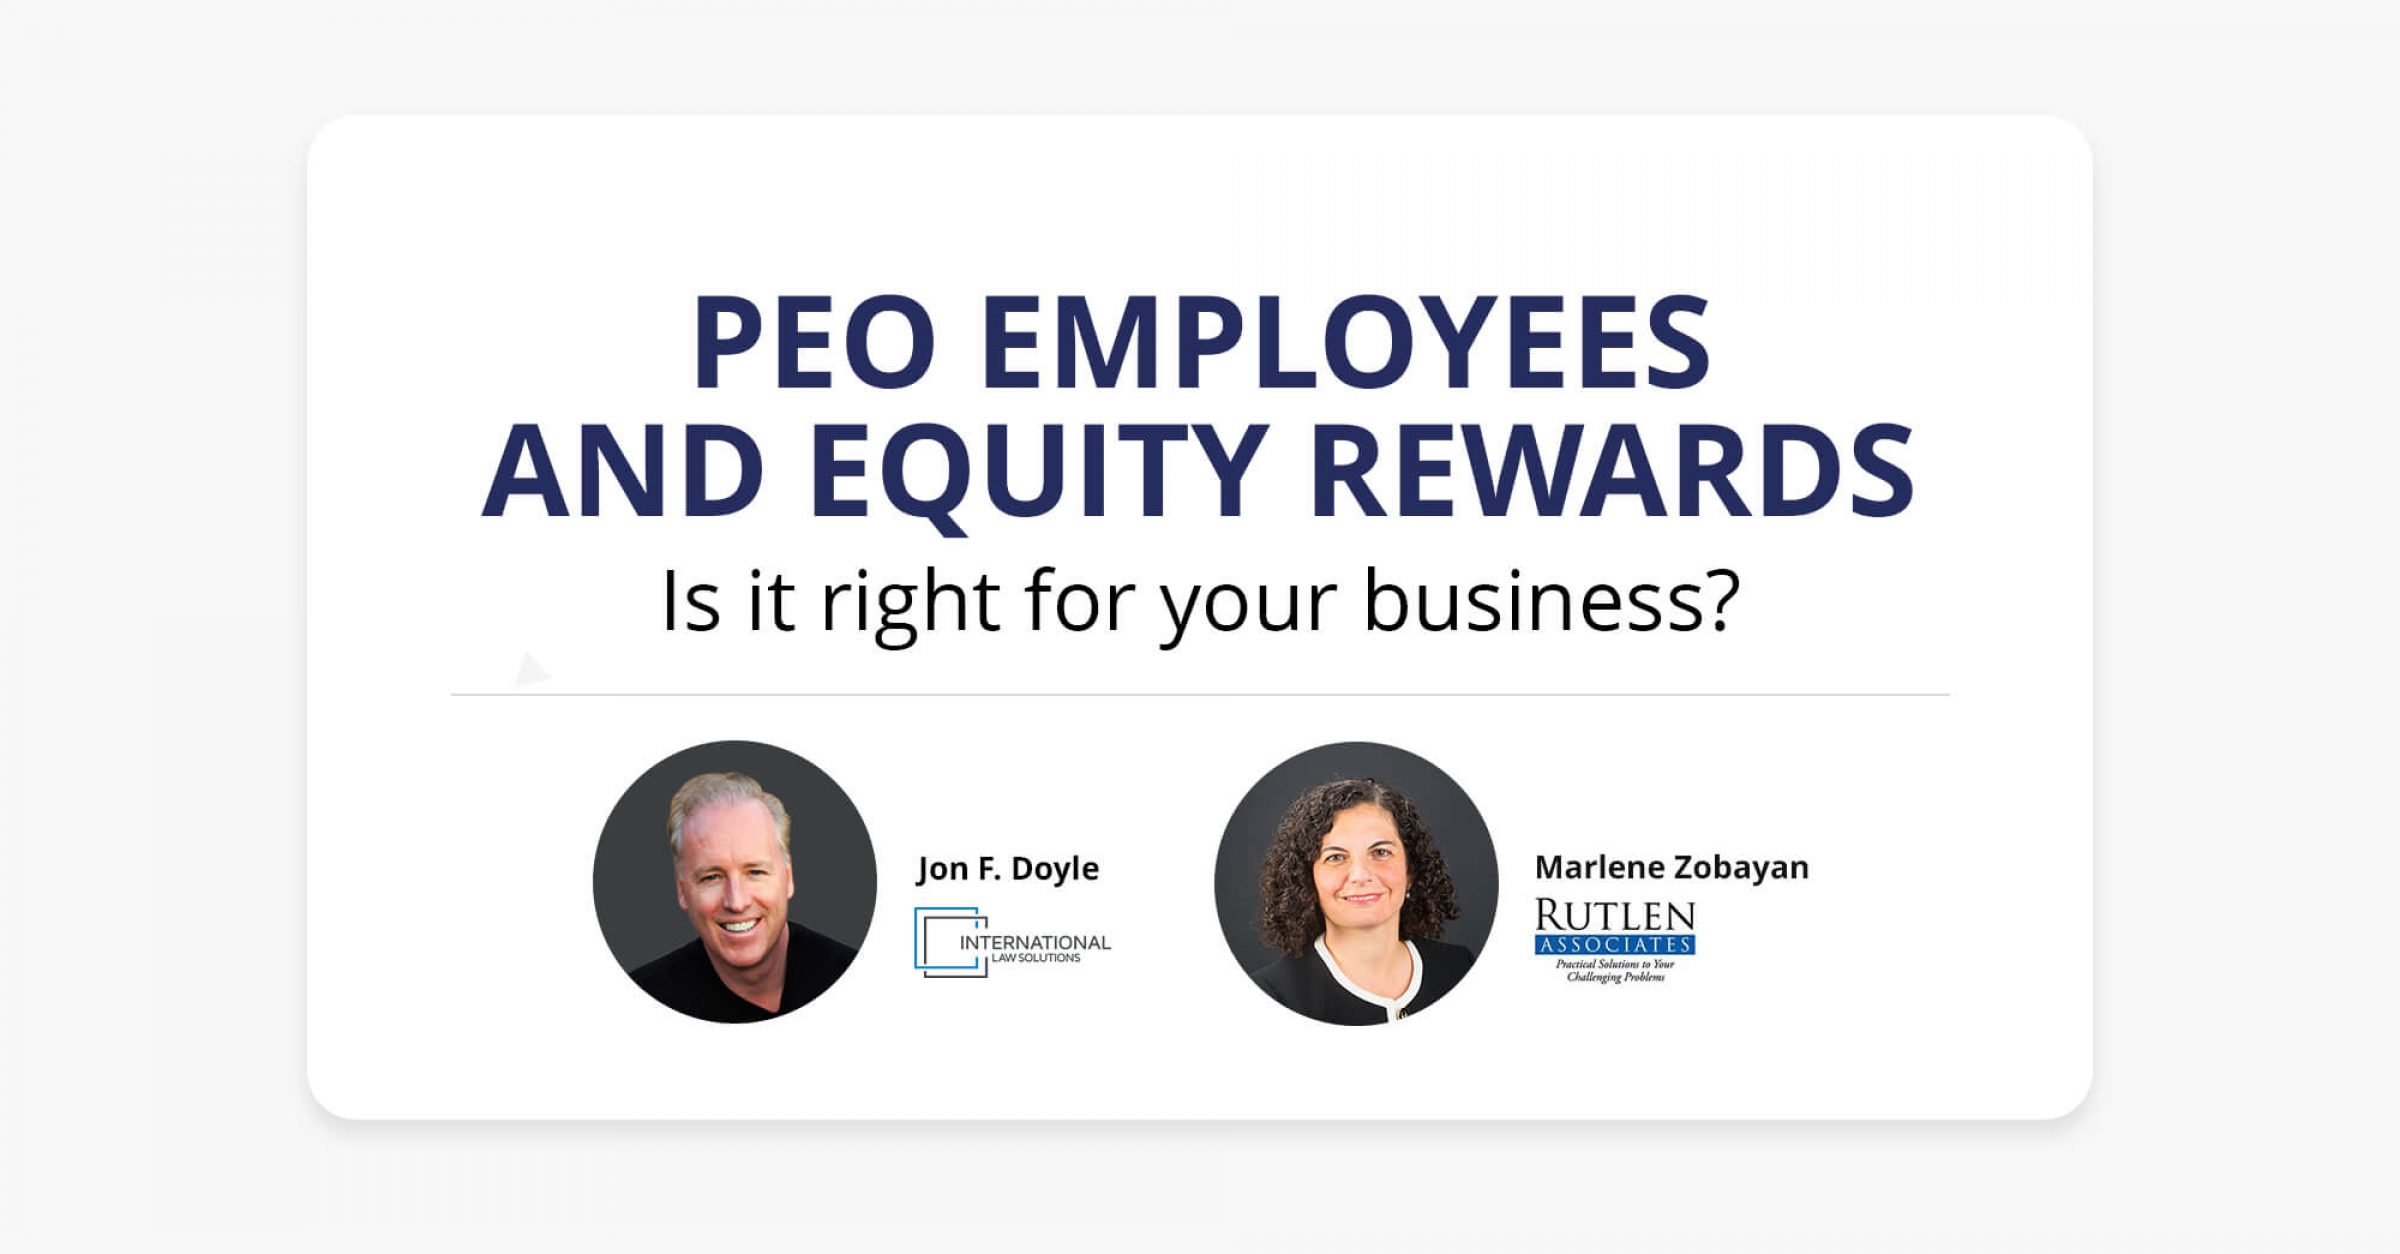 PEO employees and equity rewards